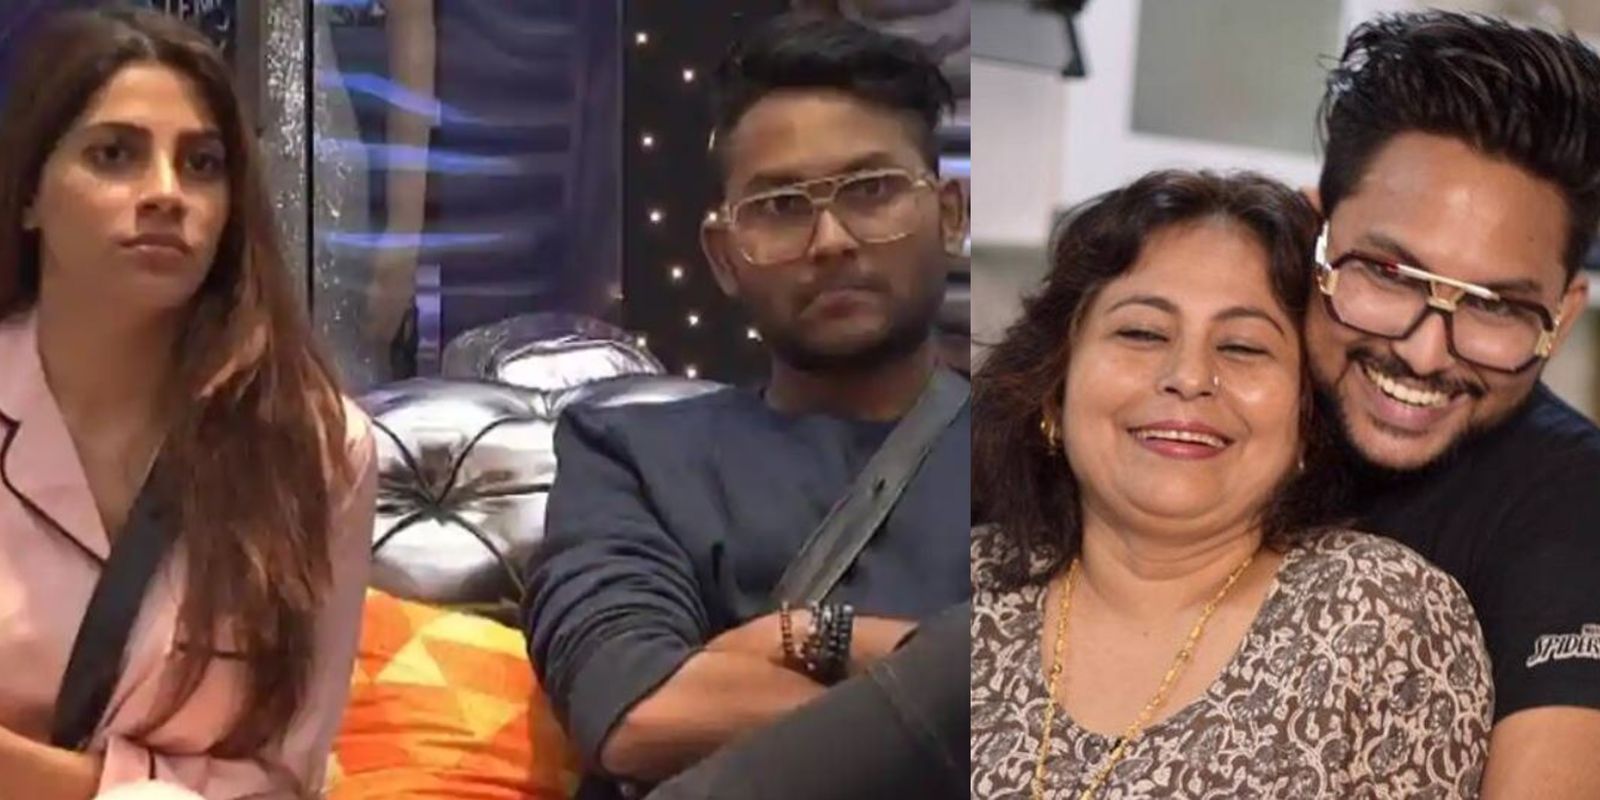 Bigg Boss 14: Jaan Kumar Sanu's Mother Had Sent A Special Diwali Gift For Nikki Tamboli, Here's Why She Didn't Receive It